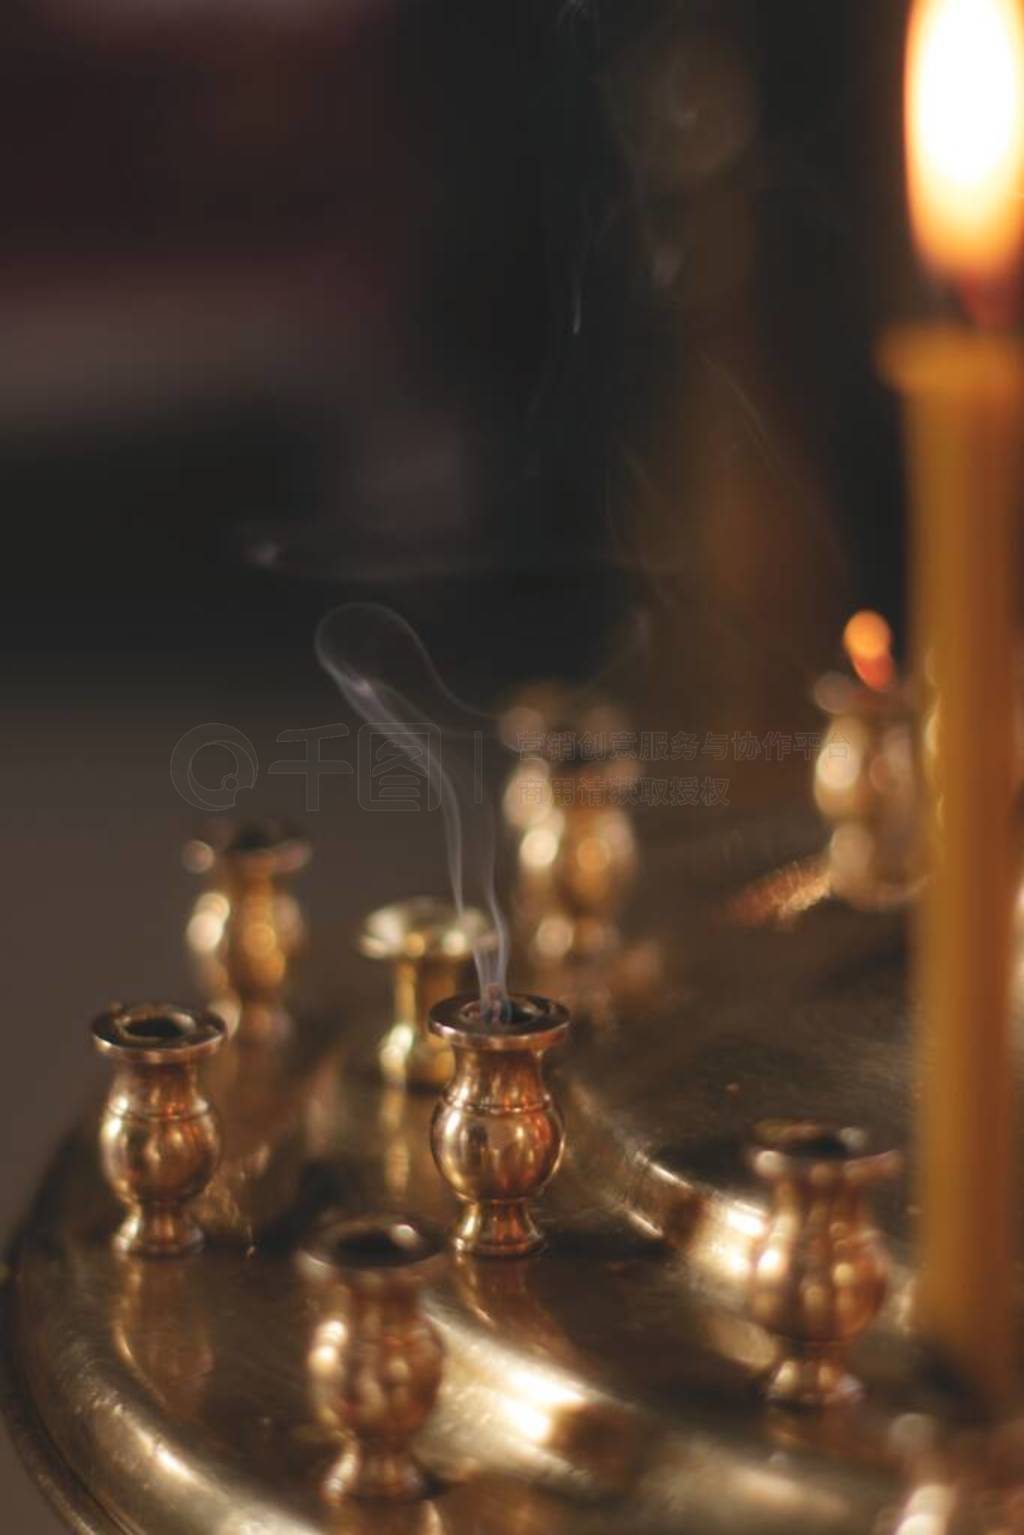 A close up of smoke in a candlestick